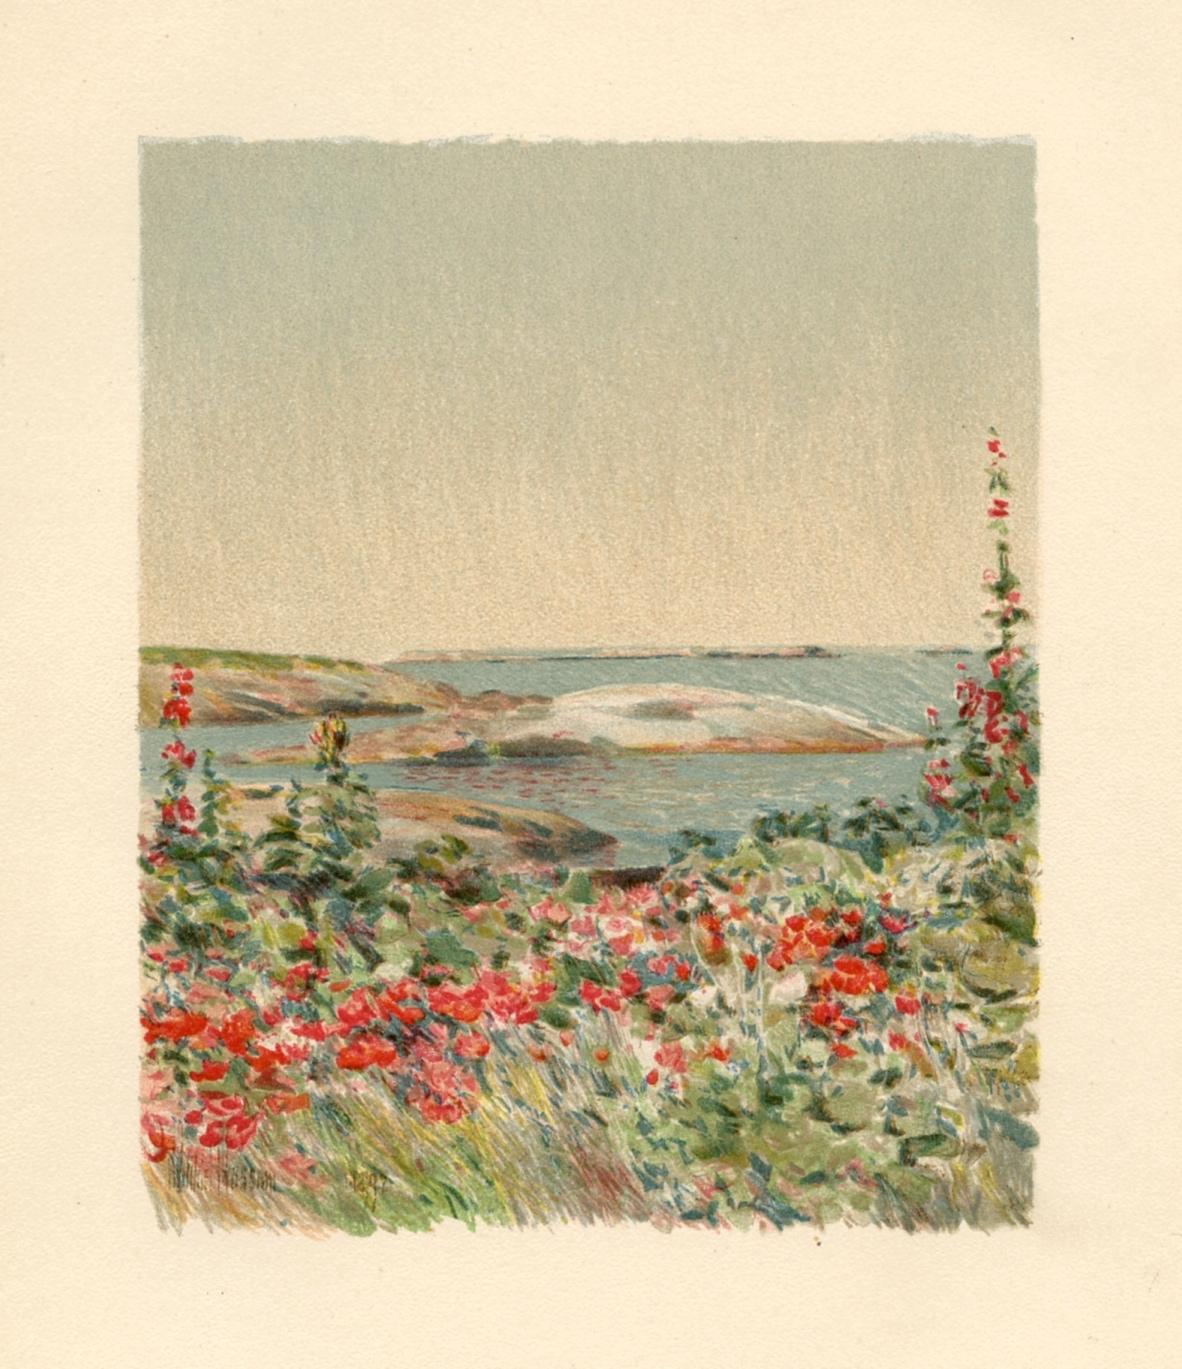 Medium: chromolithograph (after the watercolor). Beautifully printed in 1894 to illustrate the rare Celia Thaxter volume entitled "An Island Garden". Celia Thaxter and Childe Hassam were close friends, and some of his loveliest compositions were of